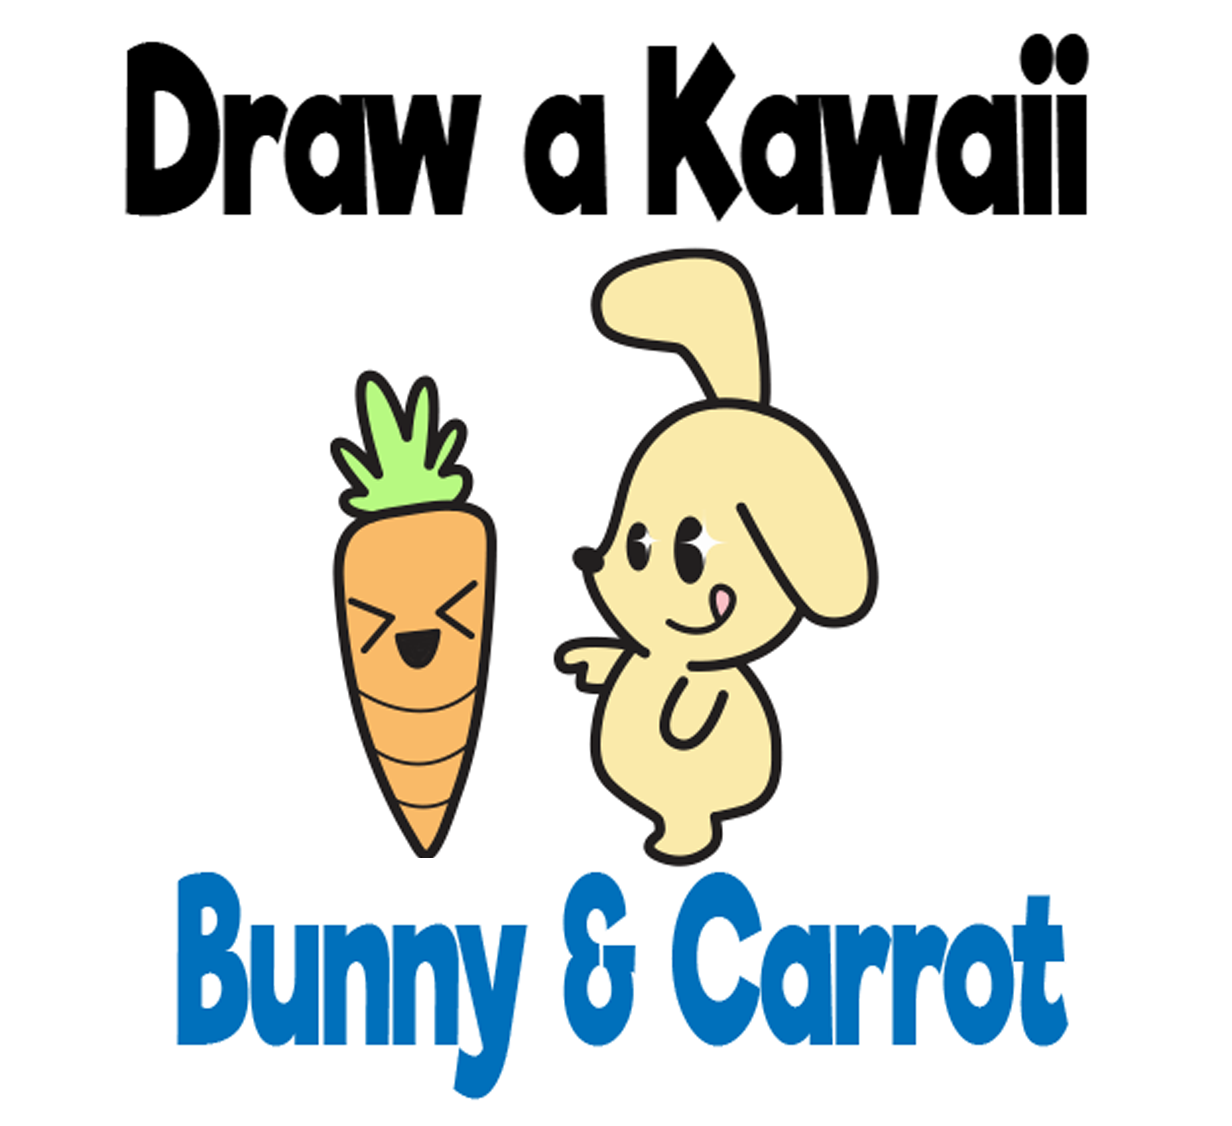 How to Draw a Cute Kawaii Bunny Rabbit and Carrot Easy Step-by-Step Drawing Tutorial for Kids